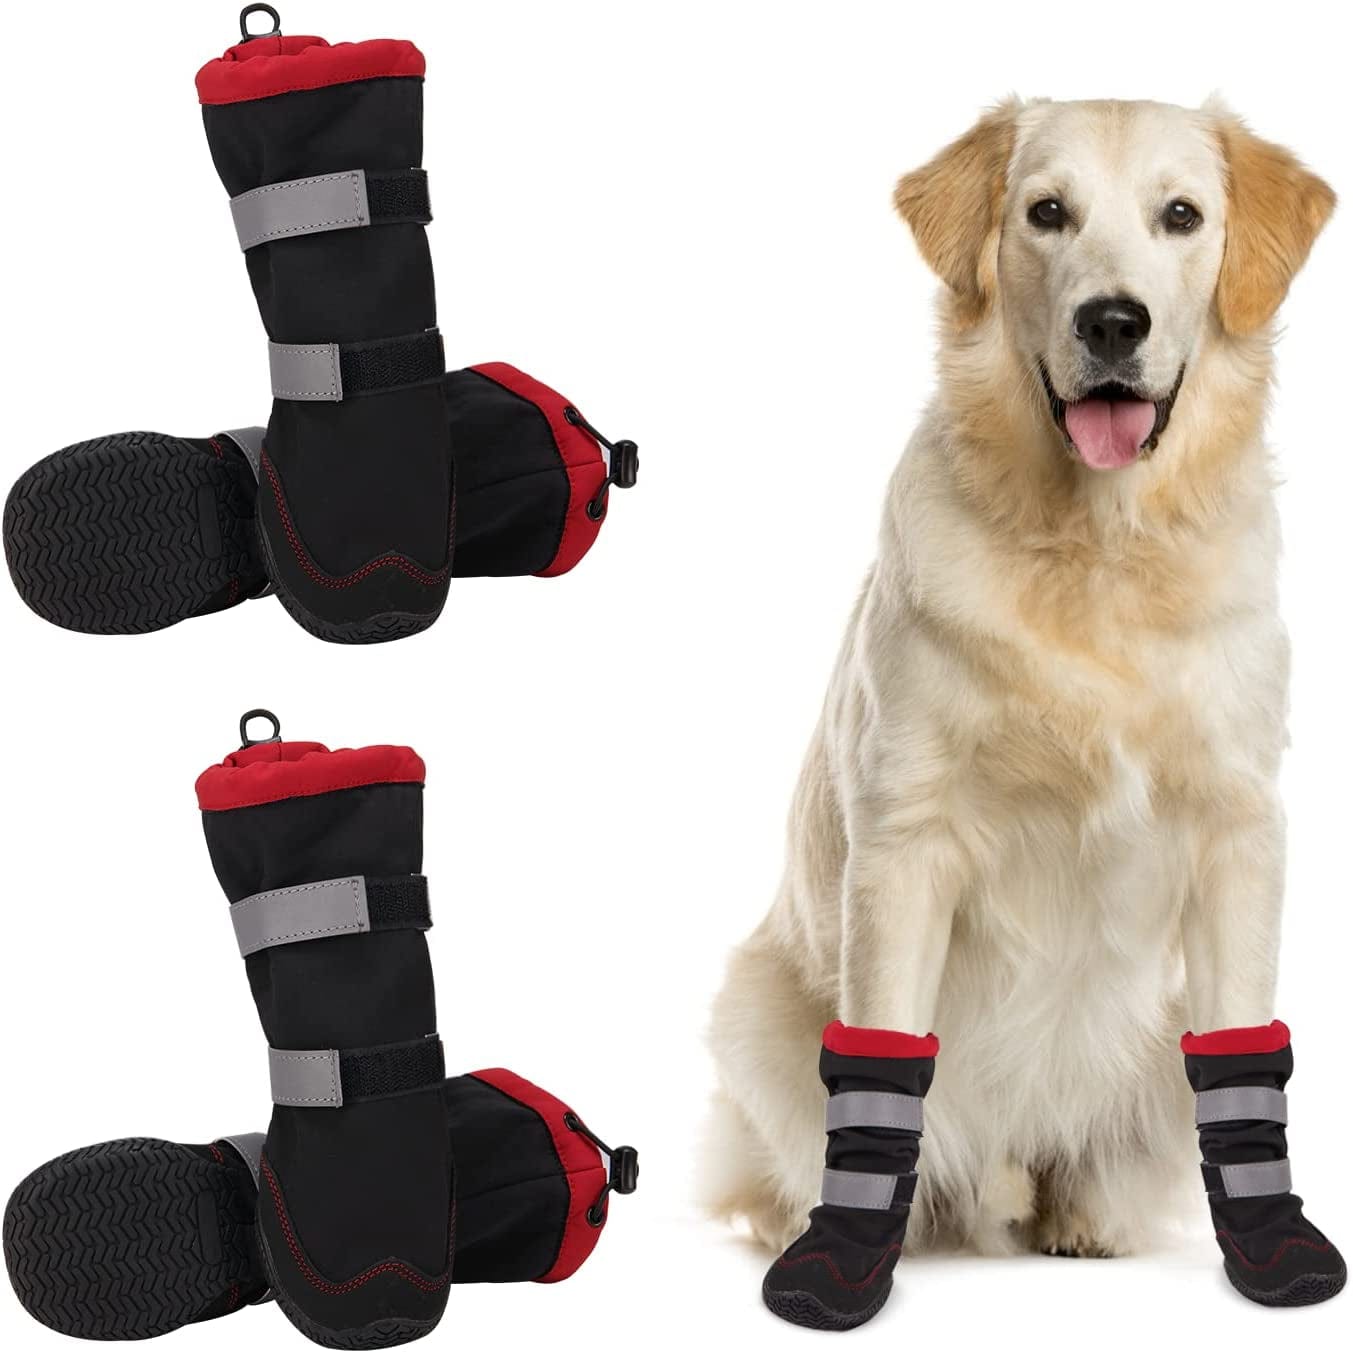 Warm Dog Boots - Fleece Lined Dog Shoes for Medium Large Dogs with Drawstring - Winter Dog Snow Boots with Anti-Slip Rugged Sole - Reflective Waterproof Dog Booties for Walking Hiking Running Outdoor